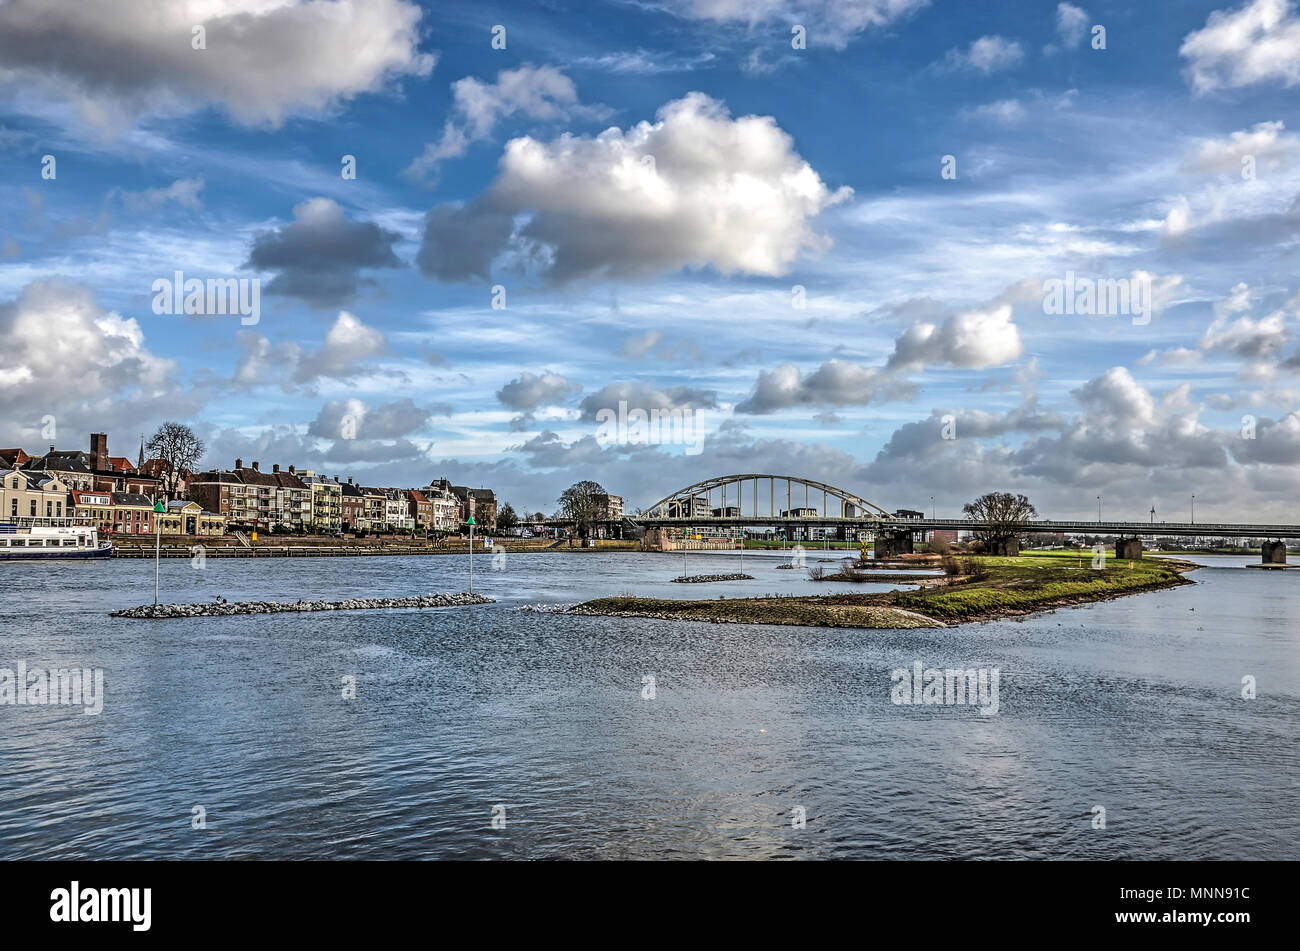 Deventer, The Netherlands, December 23, 2015: peninsula between the new side channel and the main channel of the river IJssel with newly created islan Stock Photo